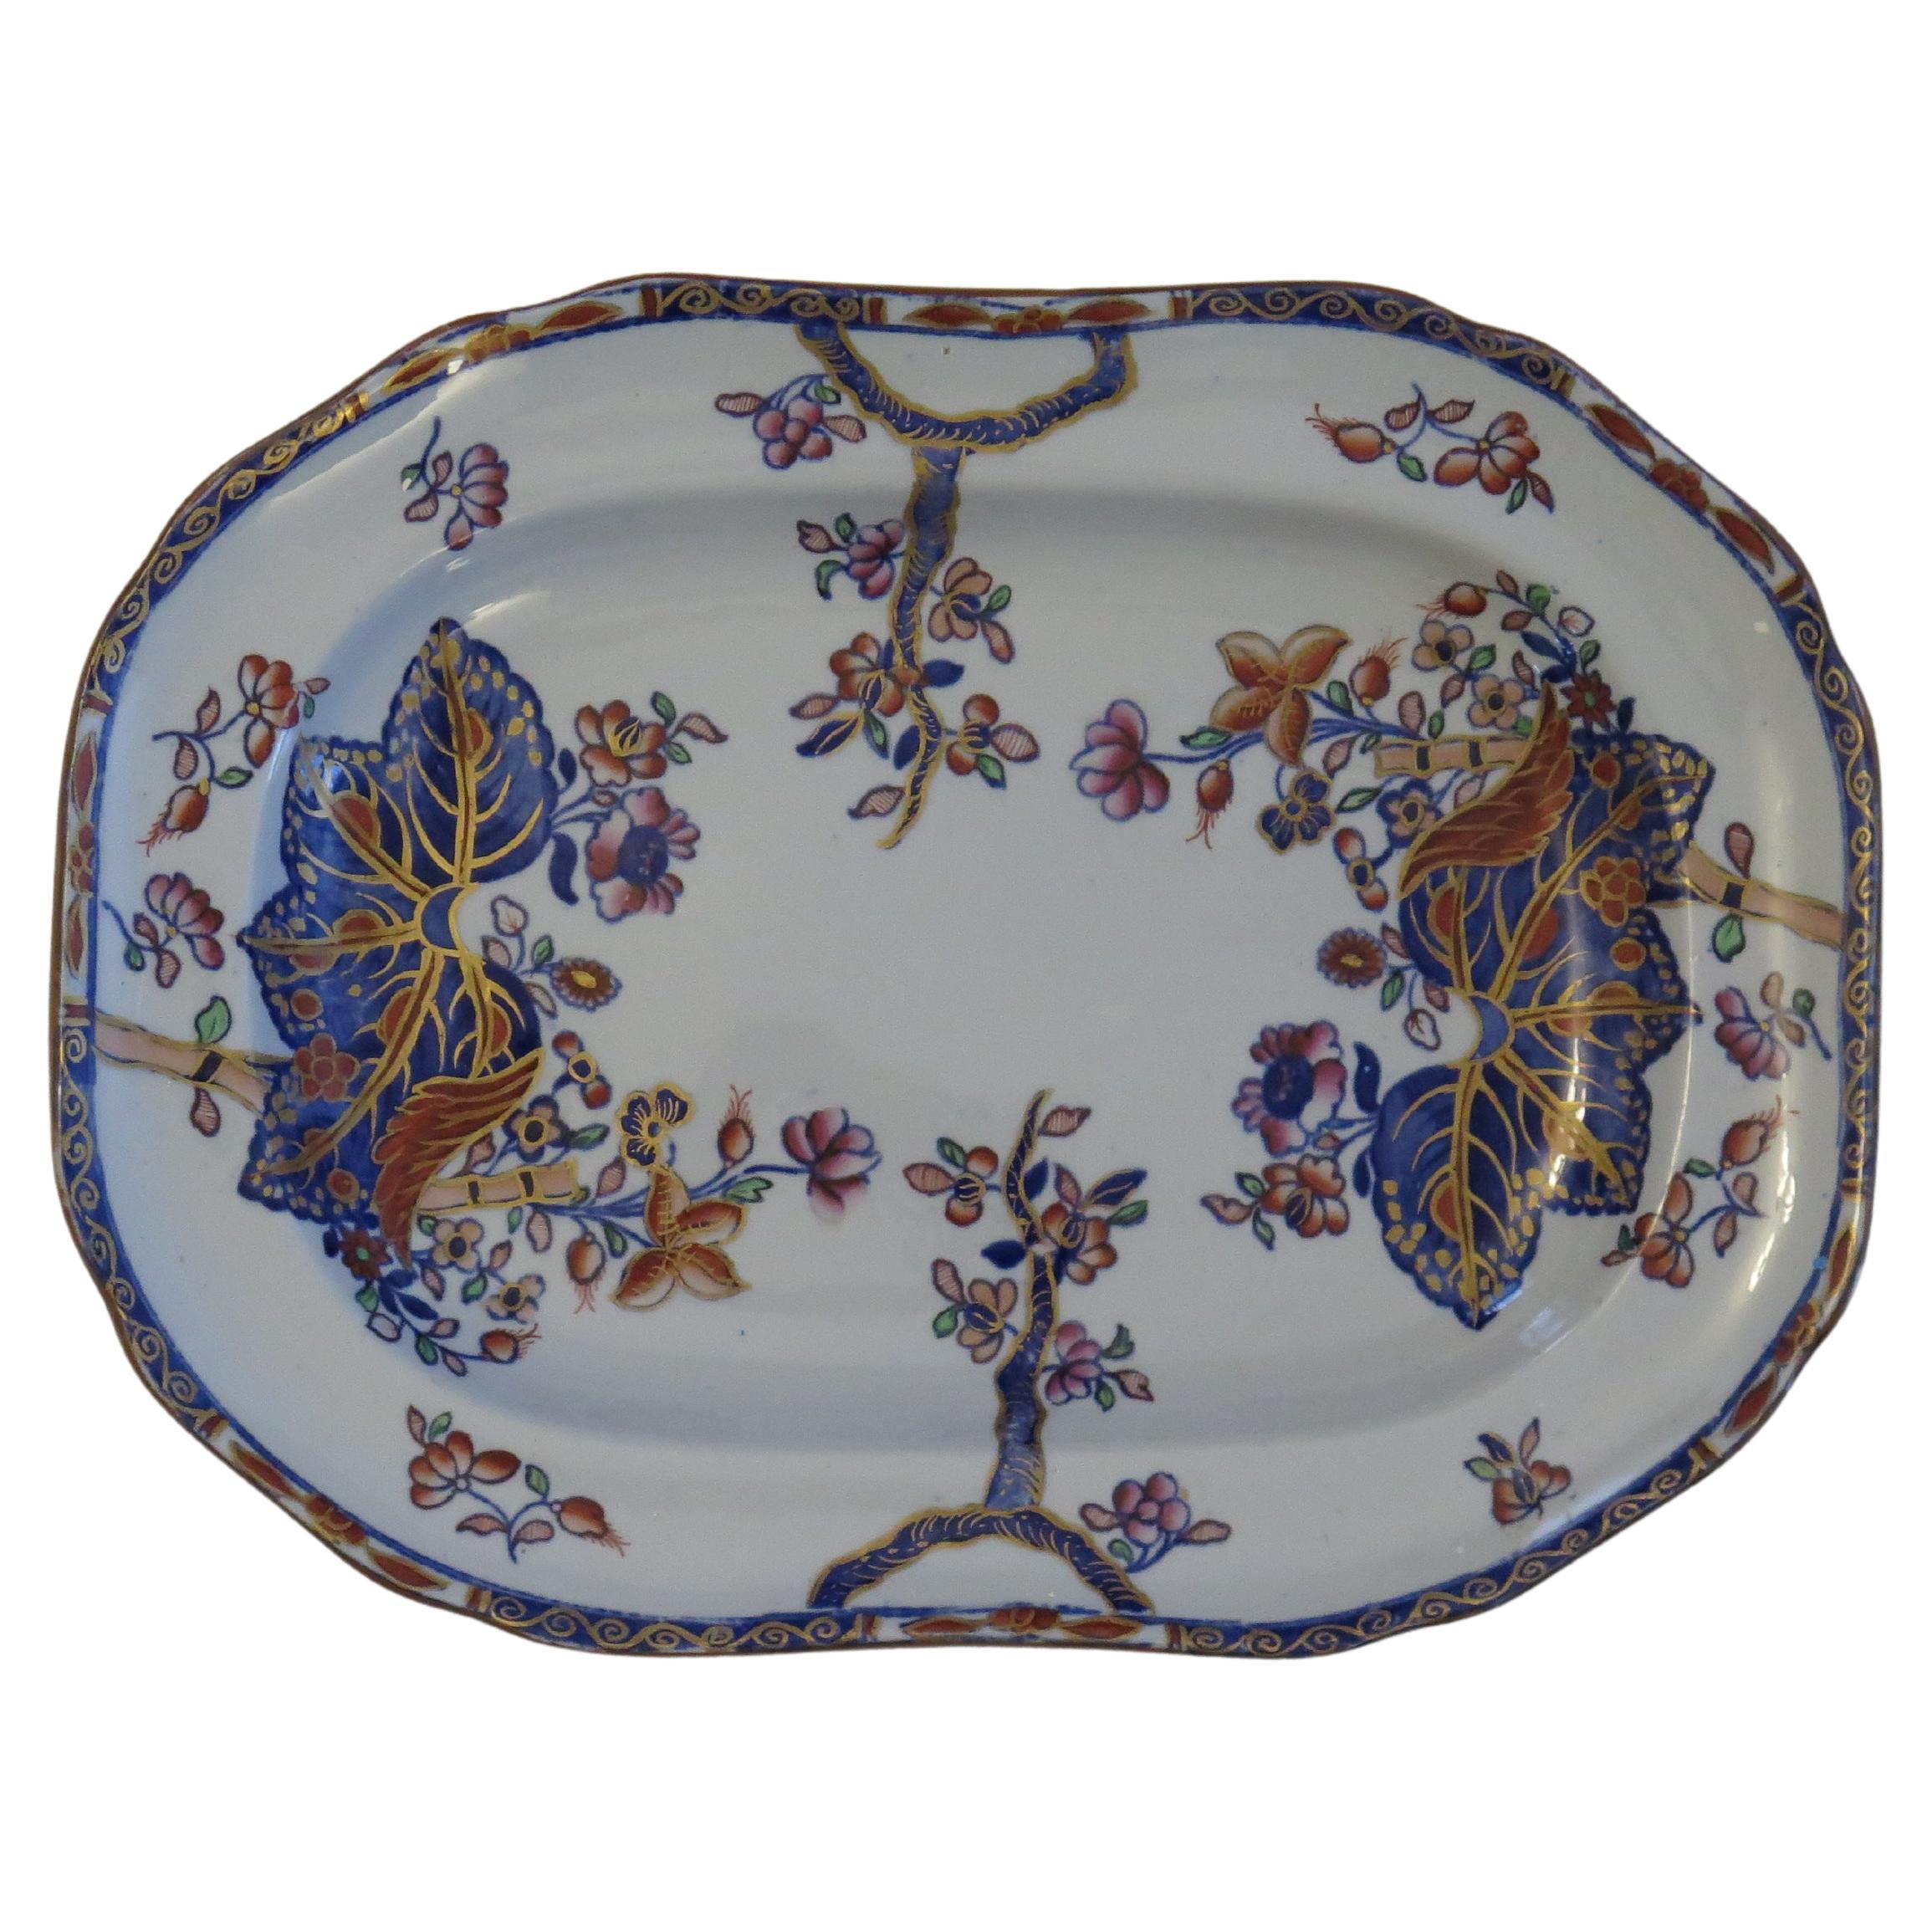 Copeland Stone China Dish or Platter in Tobacco Leaf Pattern No 2061, Mid 19th C